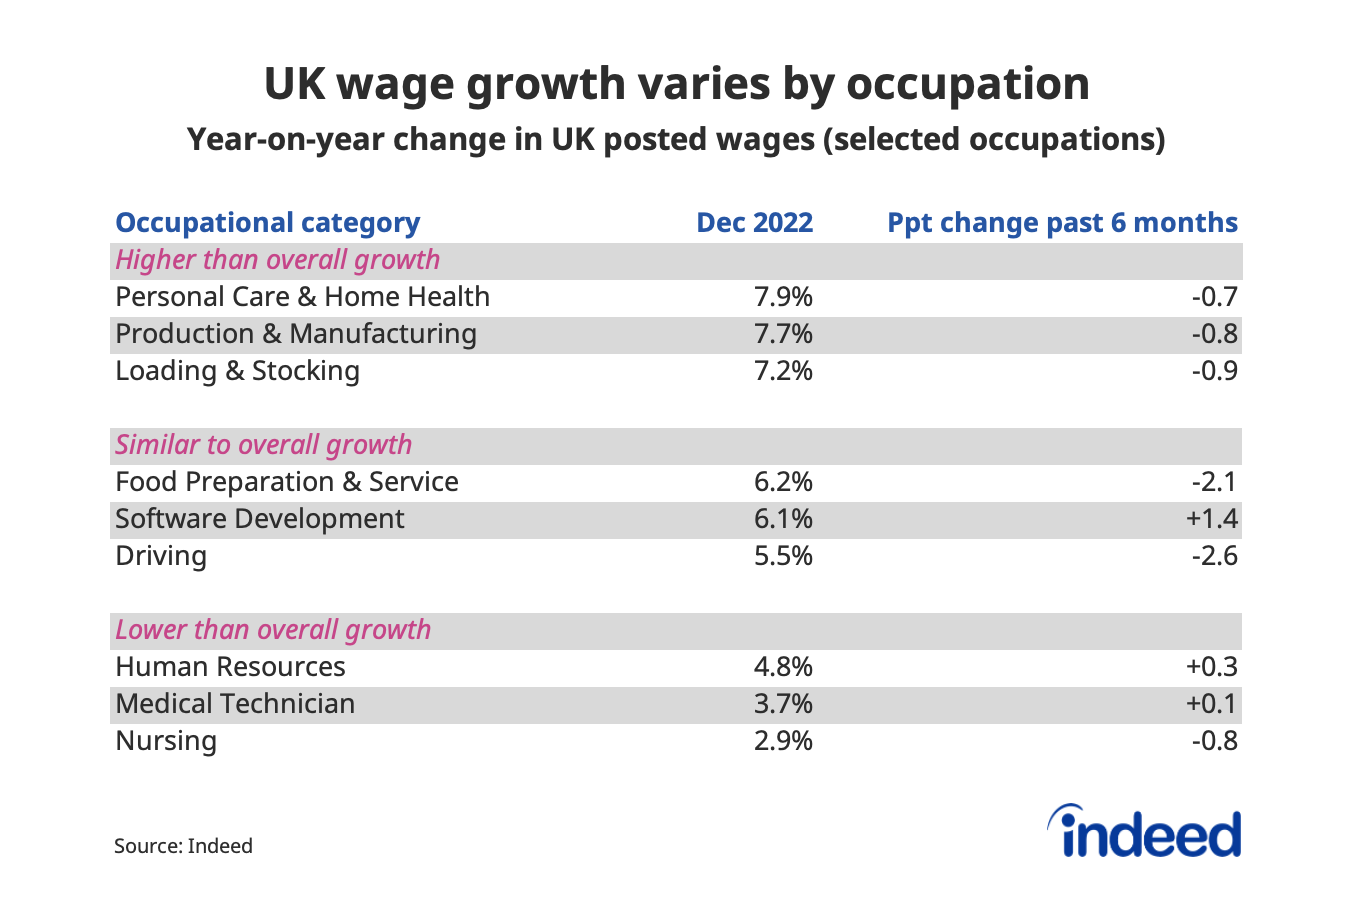 Table titled “UK wage growth varies by occupation” that shows the yearly percentage change in nominal wages in job postings for selected occupations in December 2022 and the percentage-point change in the past six months.